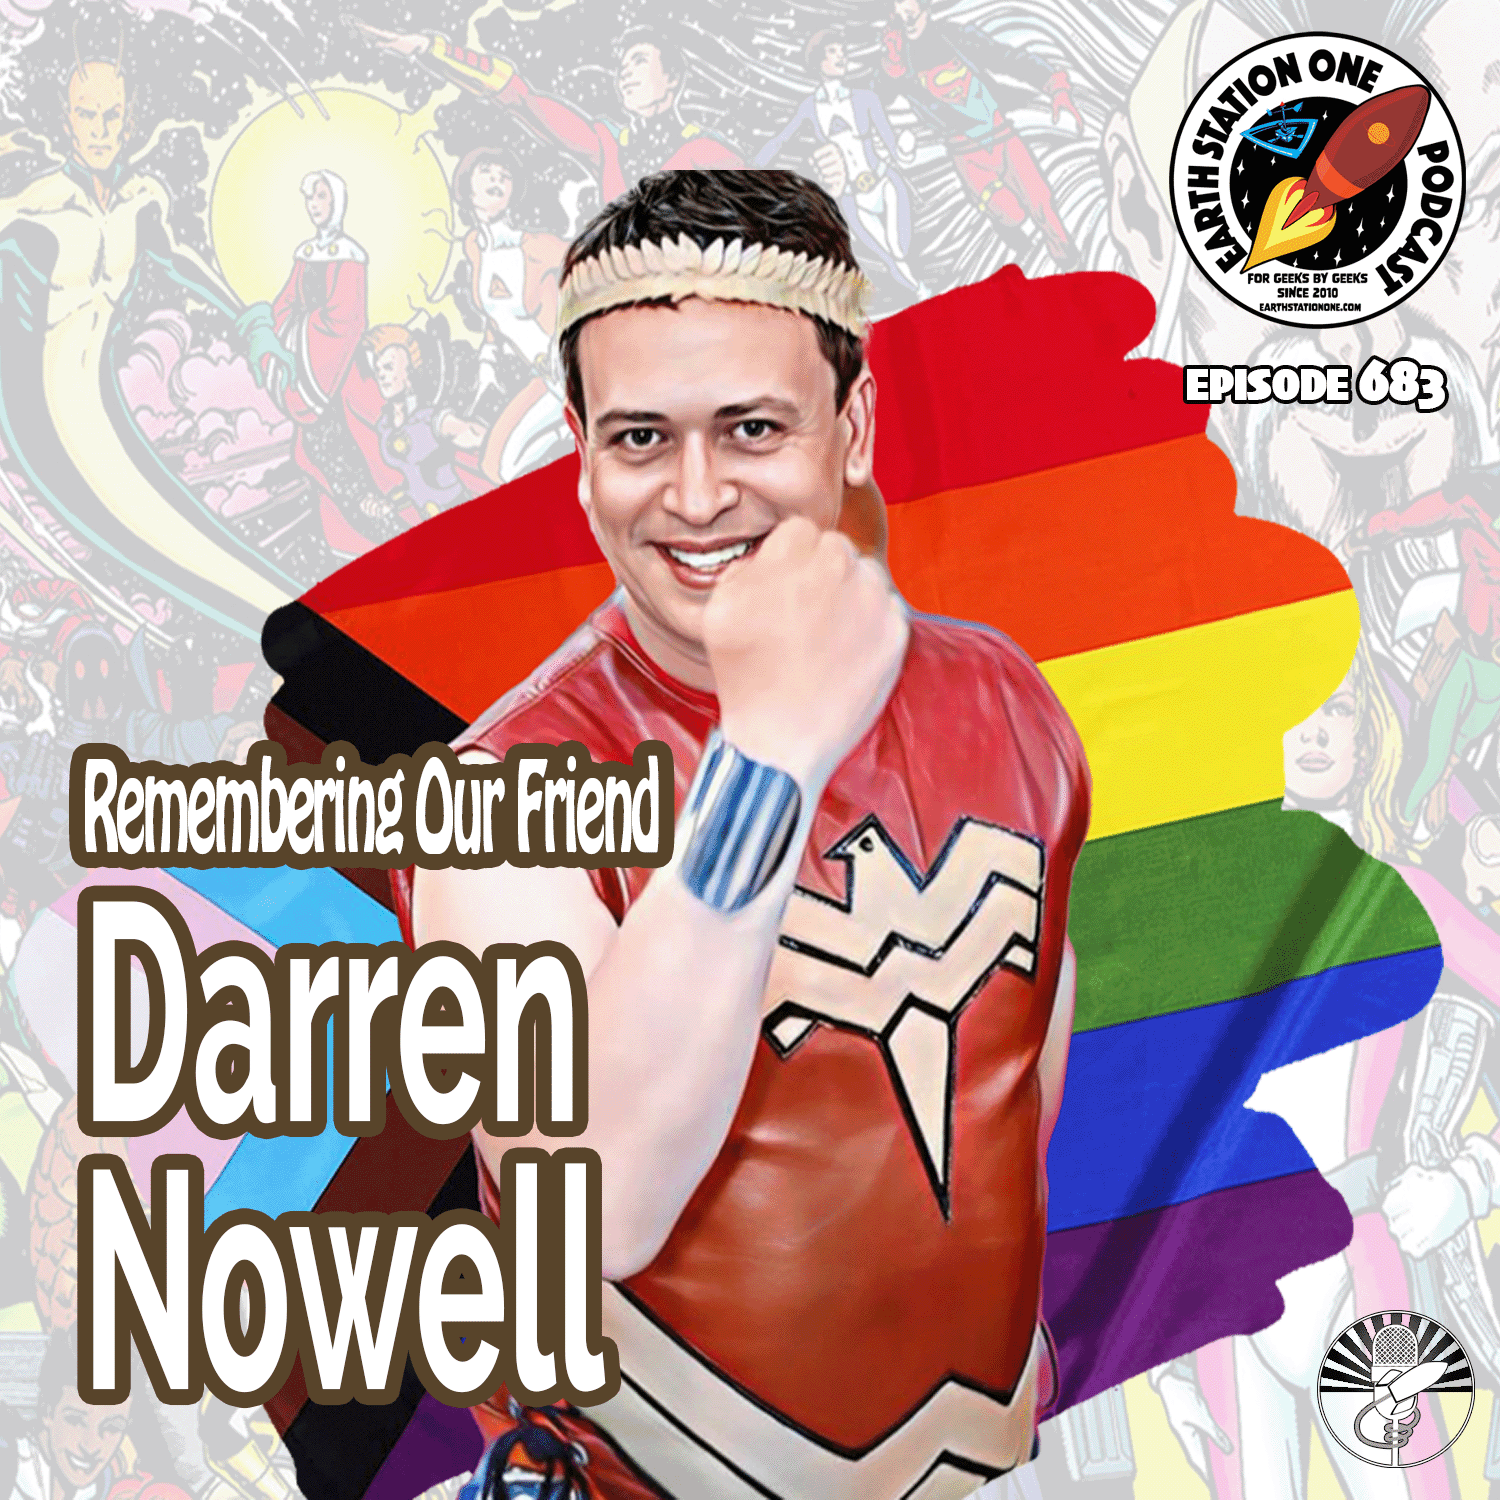 Earth Station One Podcast ep 683 - Remembering Our Friend Darren Nowell